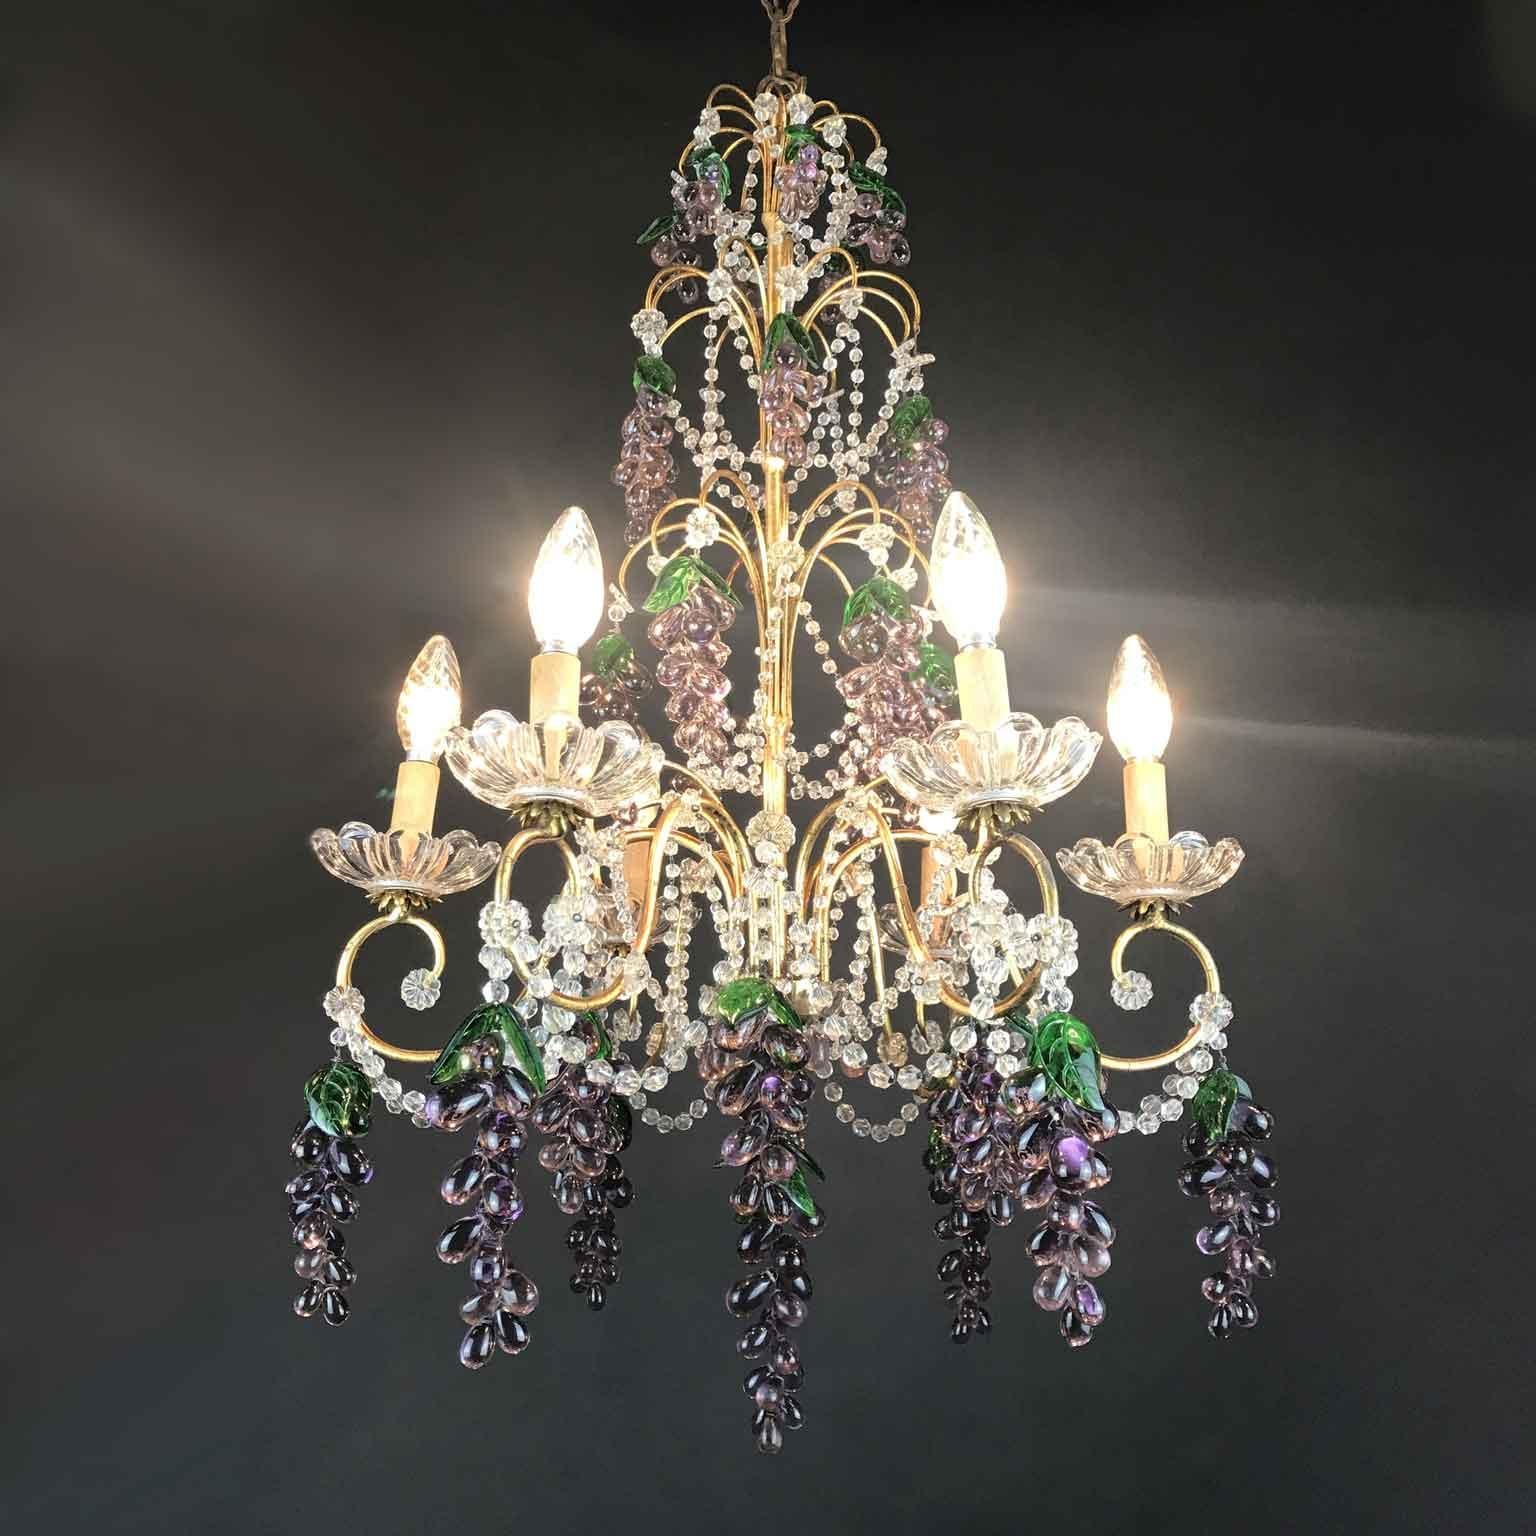 Gilt Pair of Mid-20th Century Italian Chandeliers with Purple Murano Glass Grapes